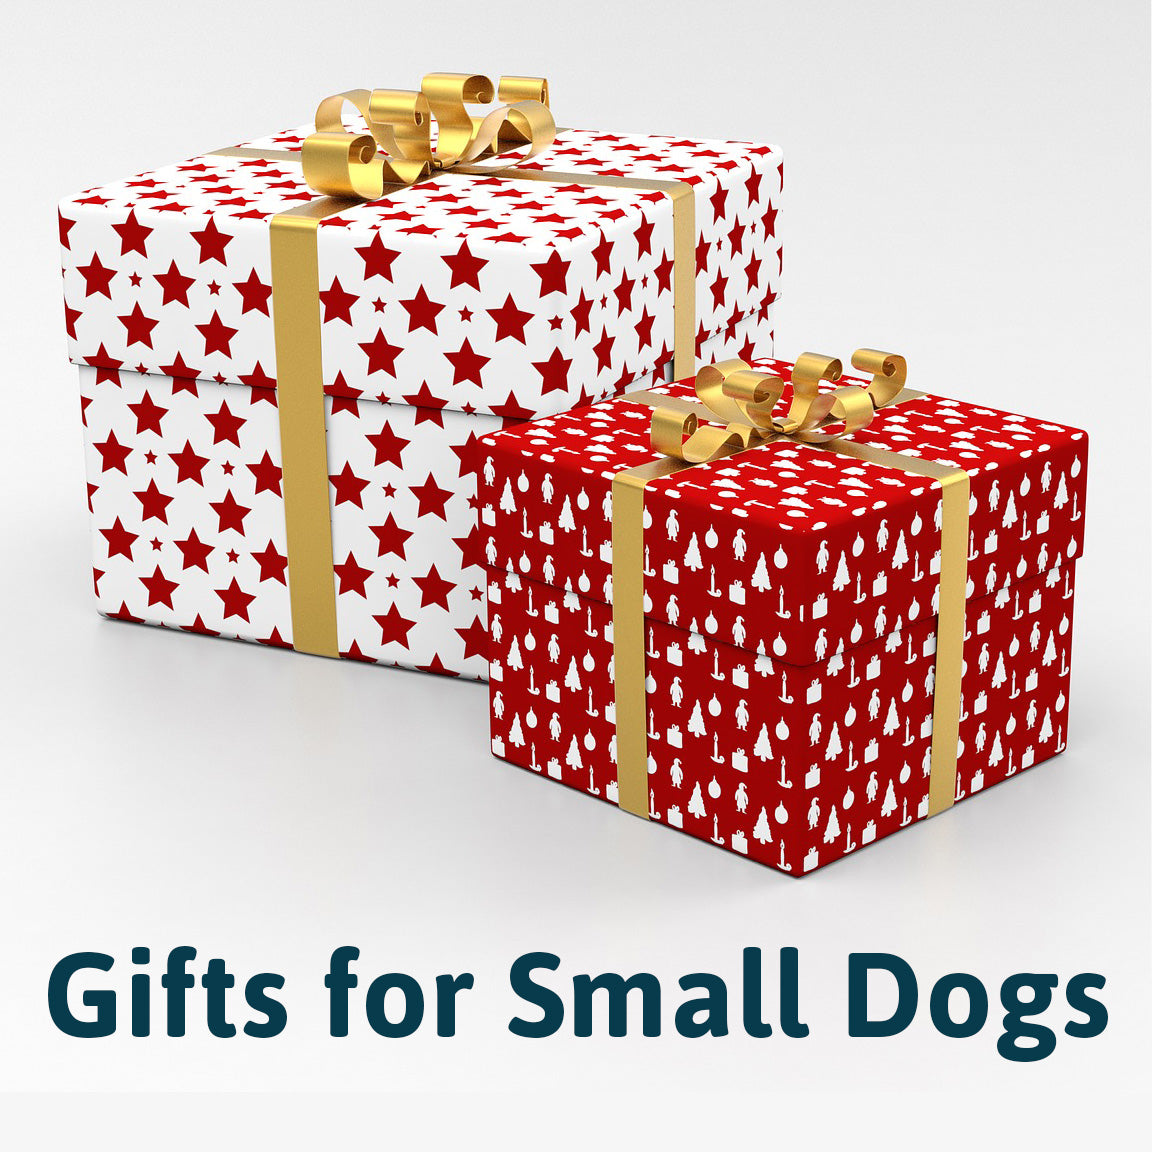 Holiday Gift Guide for Pets: Small Dogs